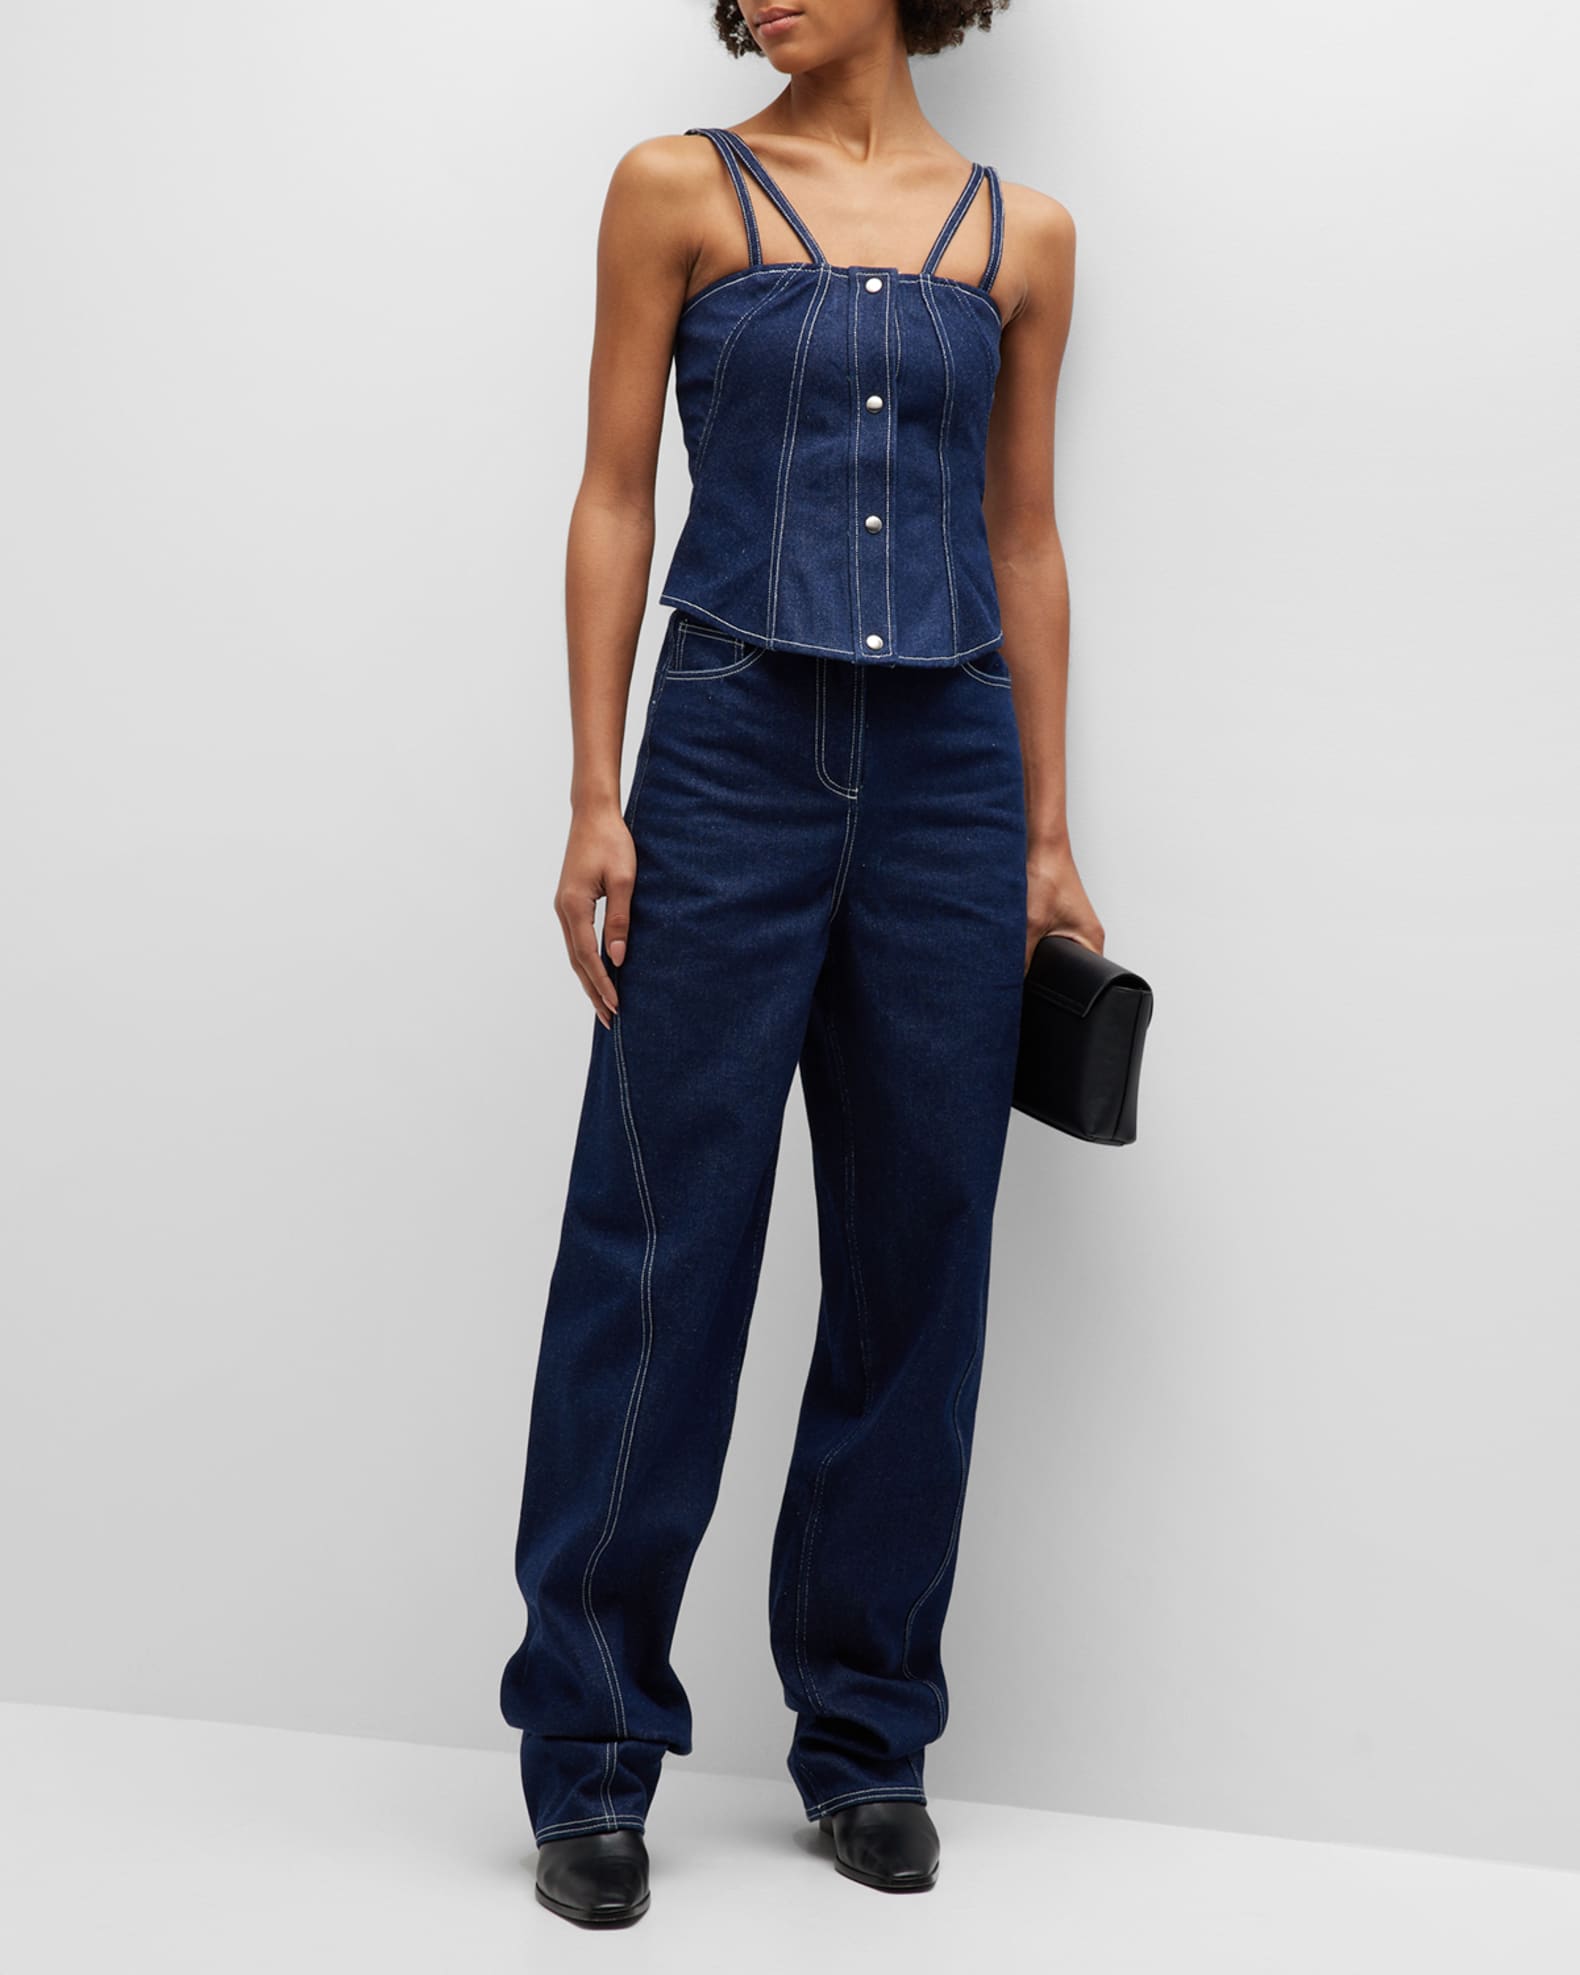 Denim Bustier and Belted Denim Trousers | Neiman Marcus